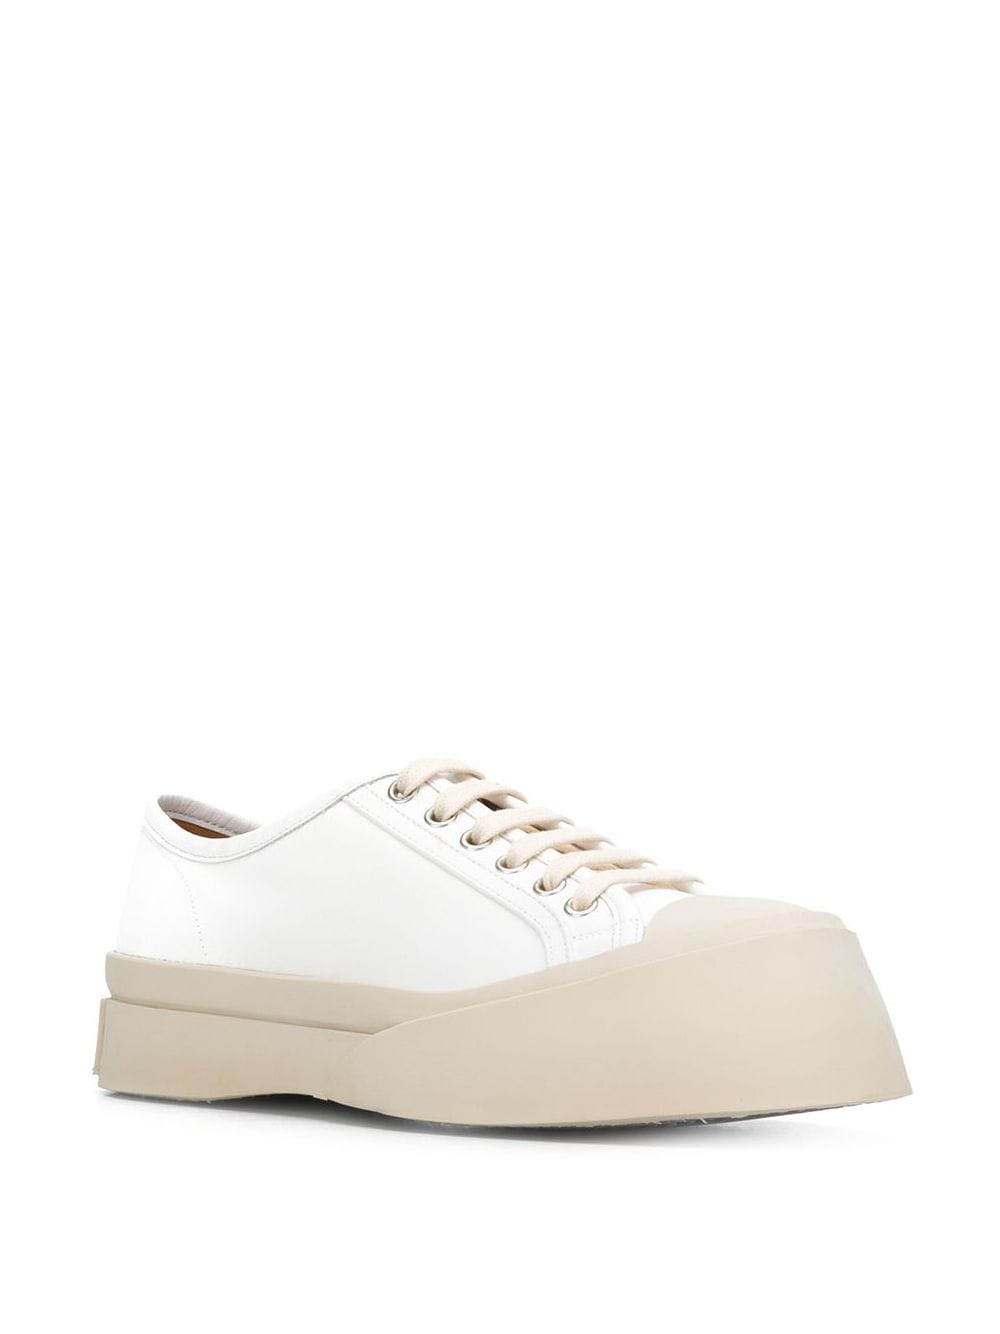 MARNI Women Laced Up Pablo Smooth Calf Leather Sneaker - 2